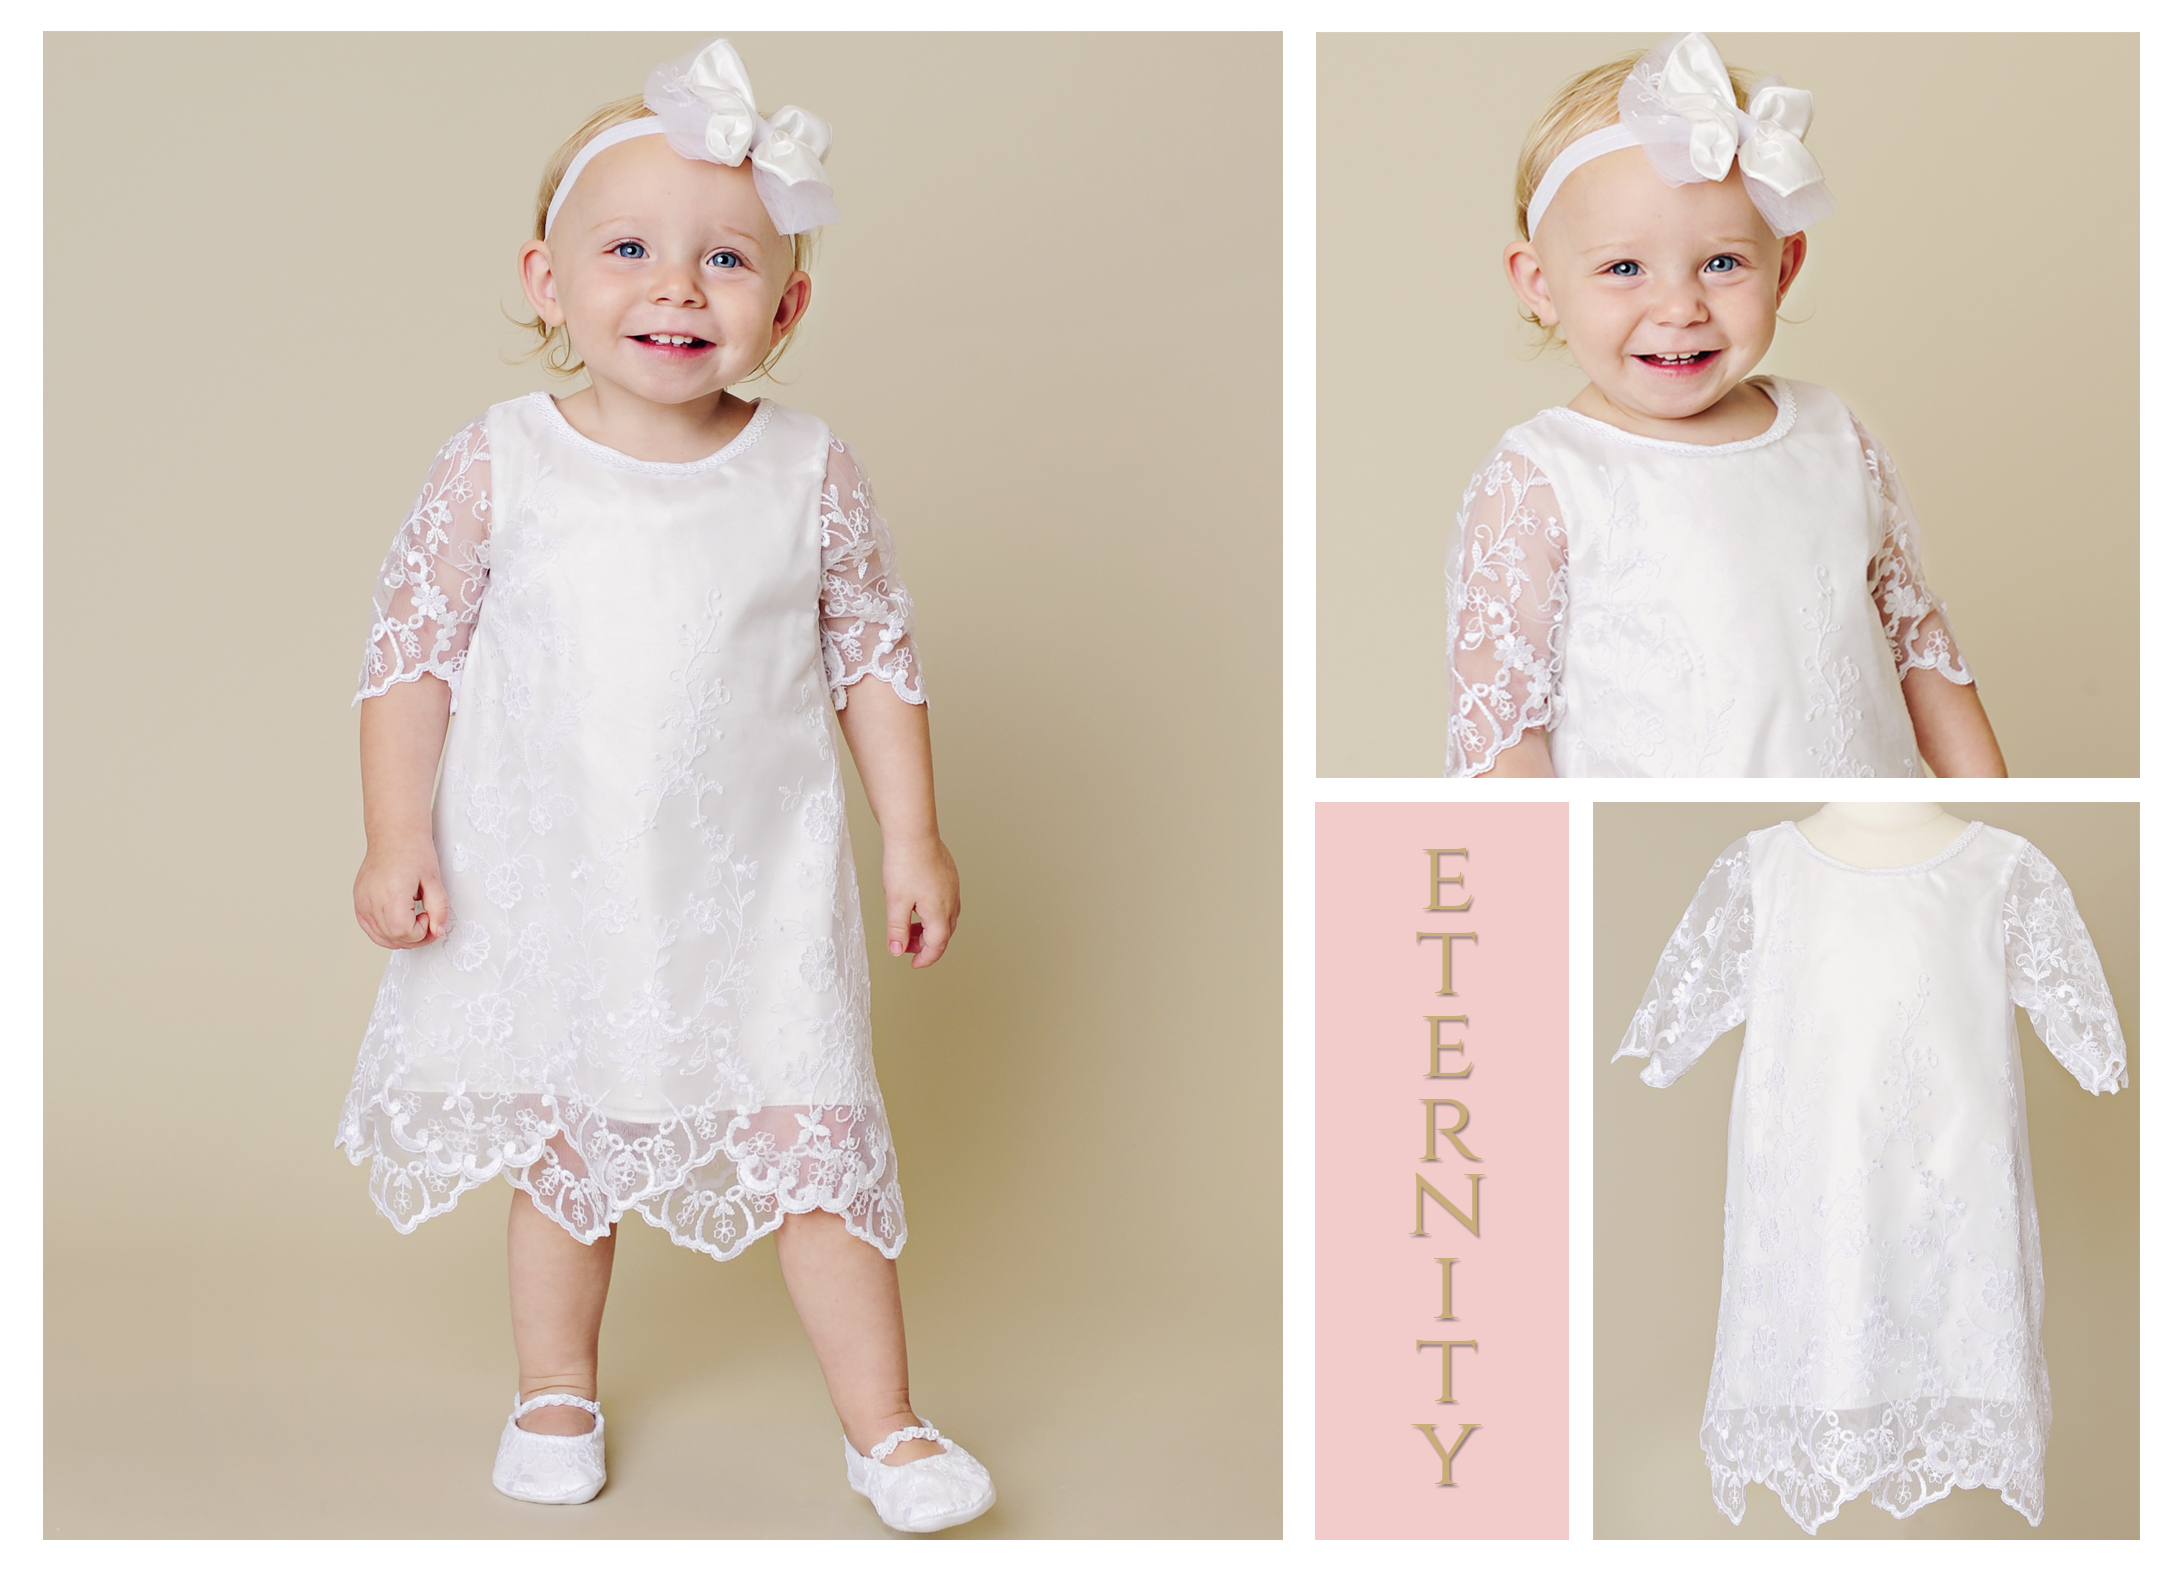 Eternity LDS Blessing Gowns - One Small Child